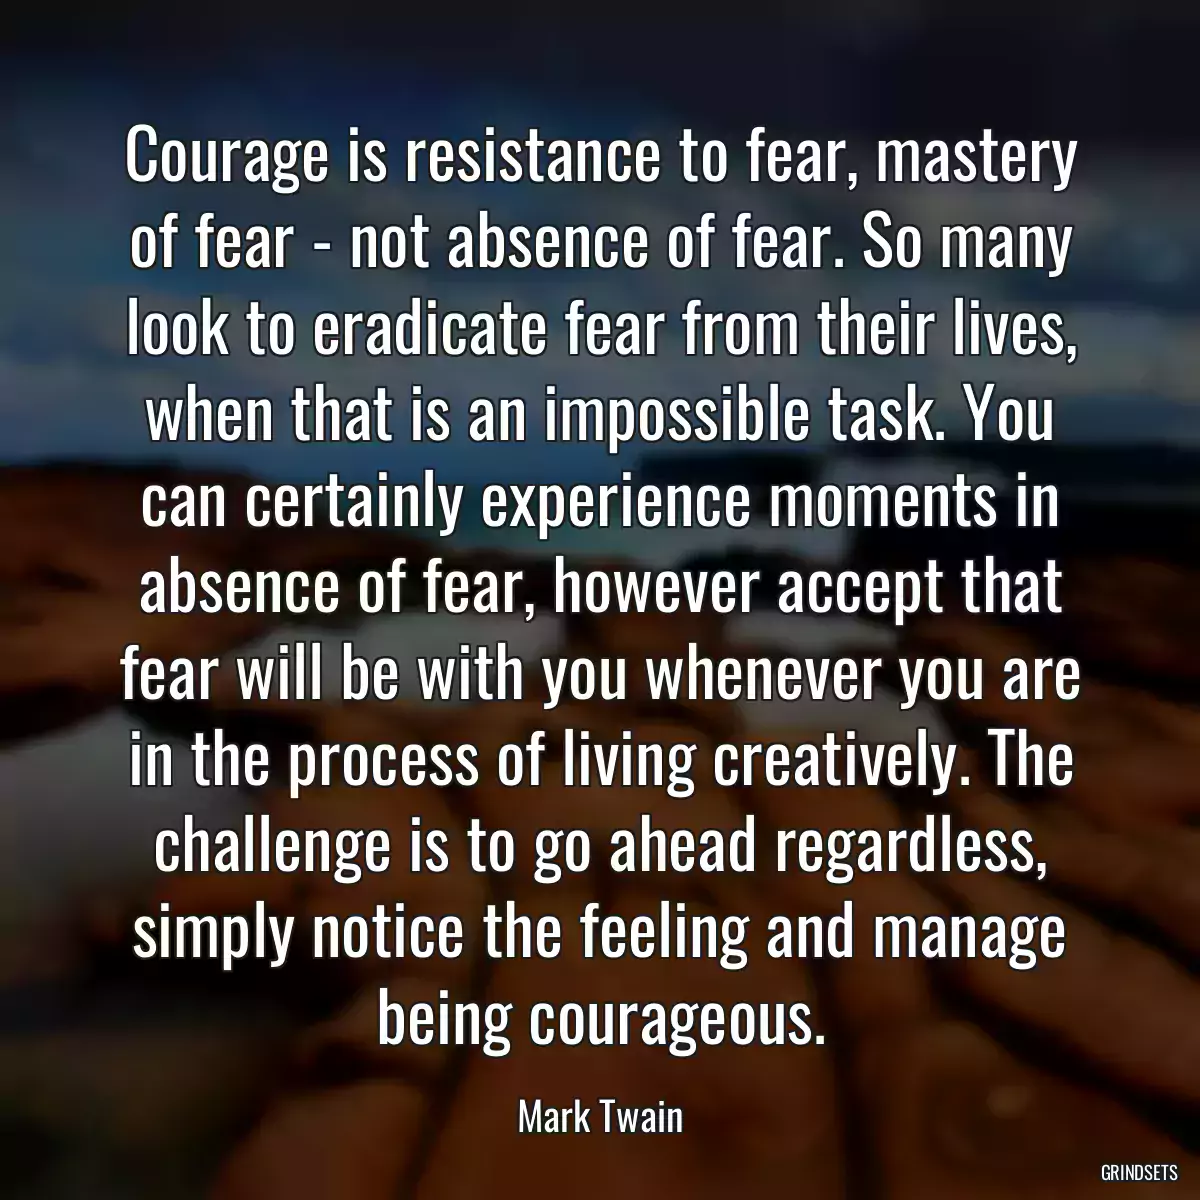 Courage is resistance to fear, mastery of fear - not absence of fear. So many look to eradicate fear from their lives, when that is an impossible task. You can certainly experience moments in absence of fear, however accept that fear will be with you whenever you are in the process of living creatively. The challenge is to go ahead regardless, simply notice the feeling and manage being courageous.